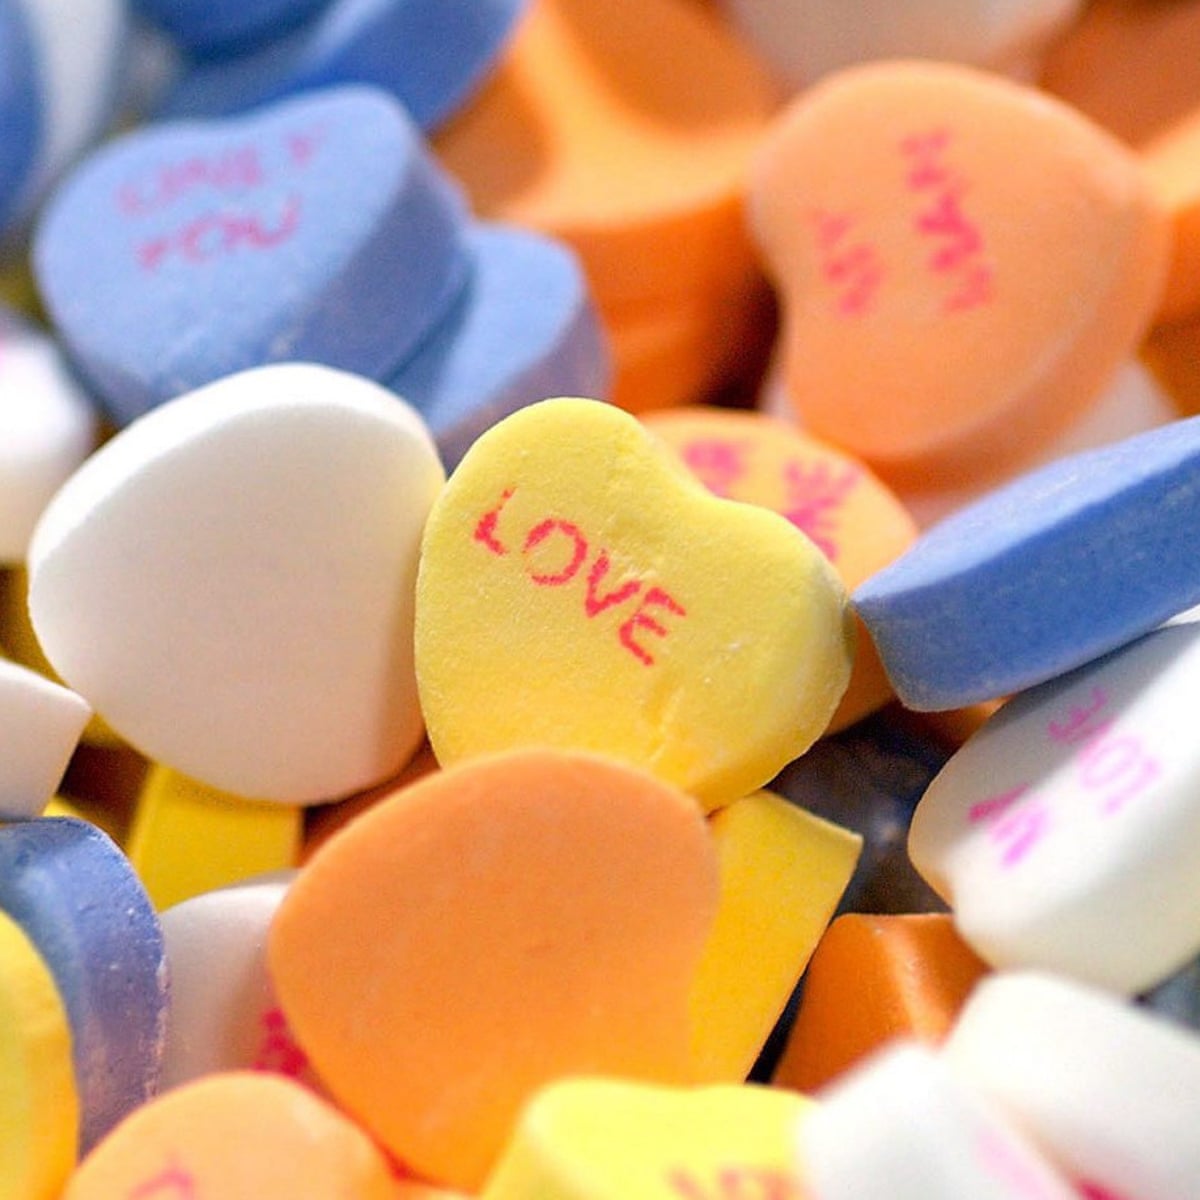 Be still my eating heart: Sweethearts won't be on sale this Valentine's Day, Valentine's Day